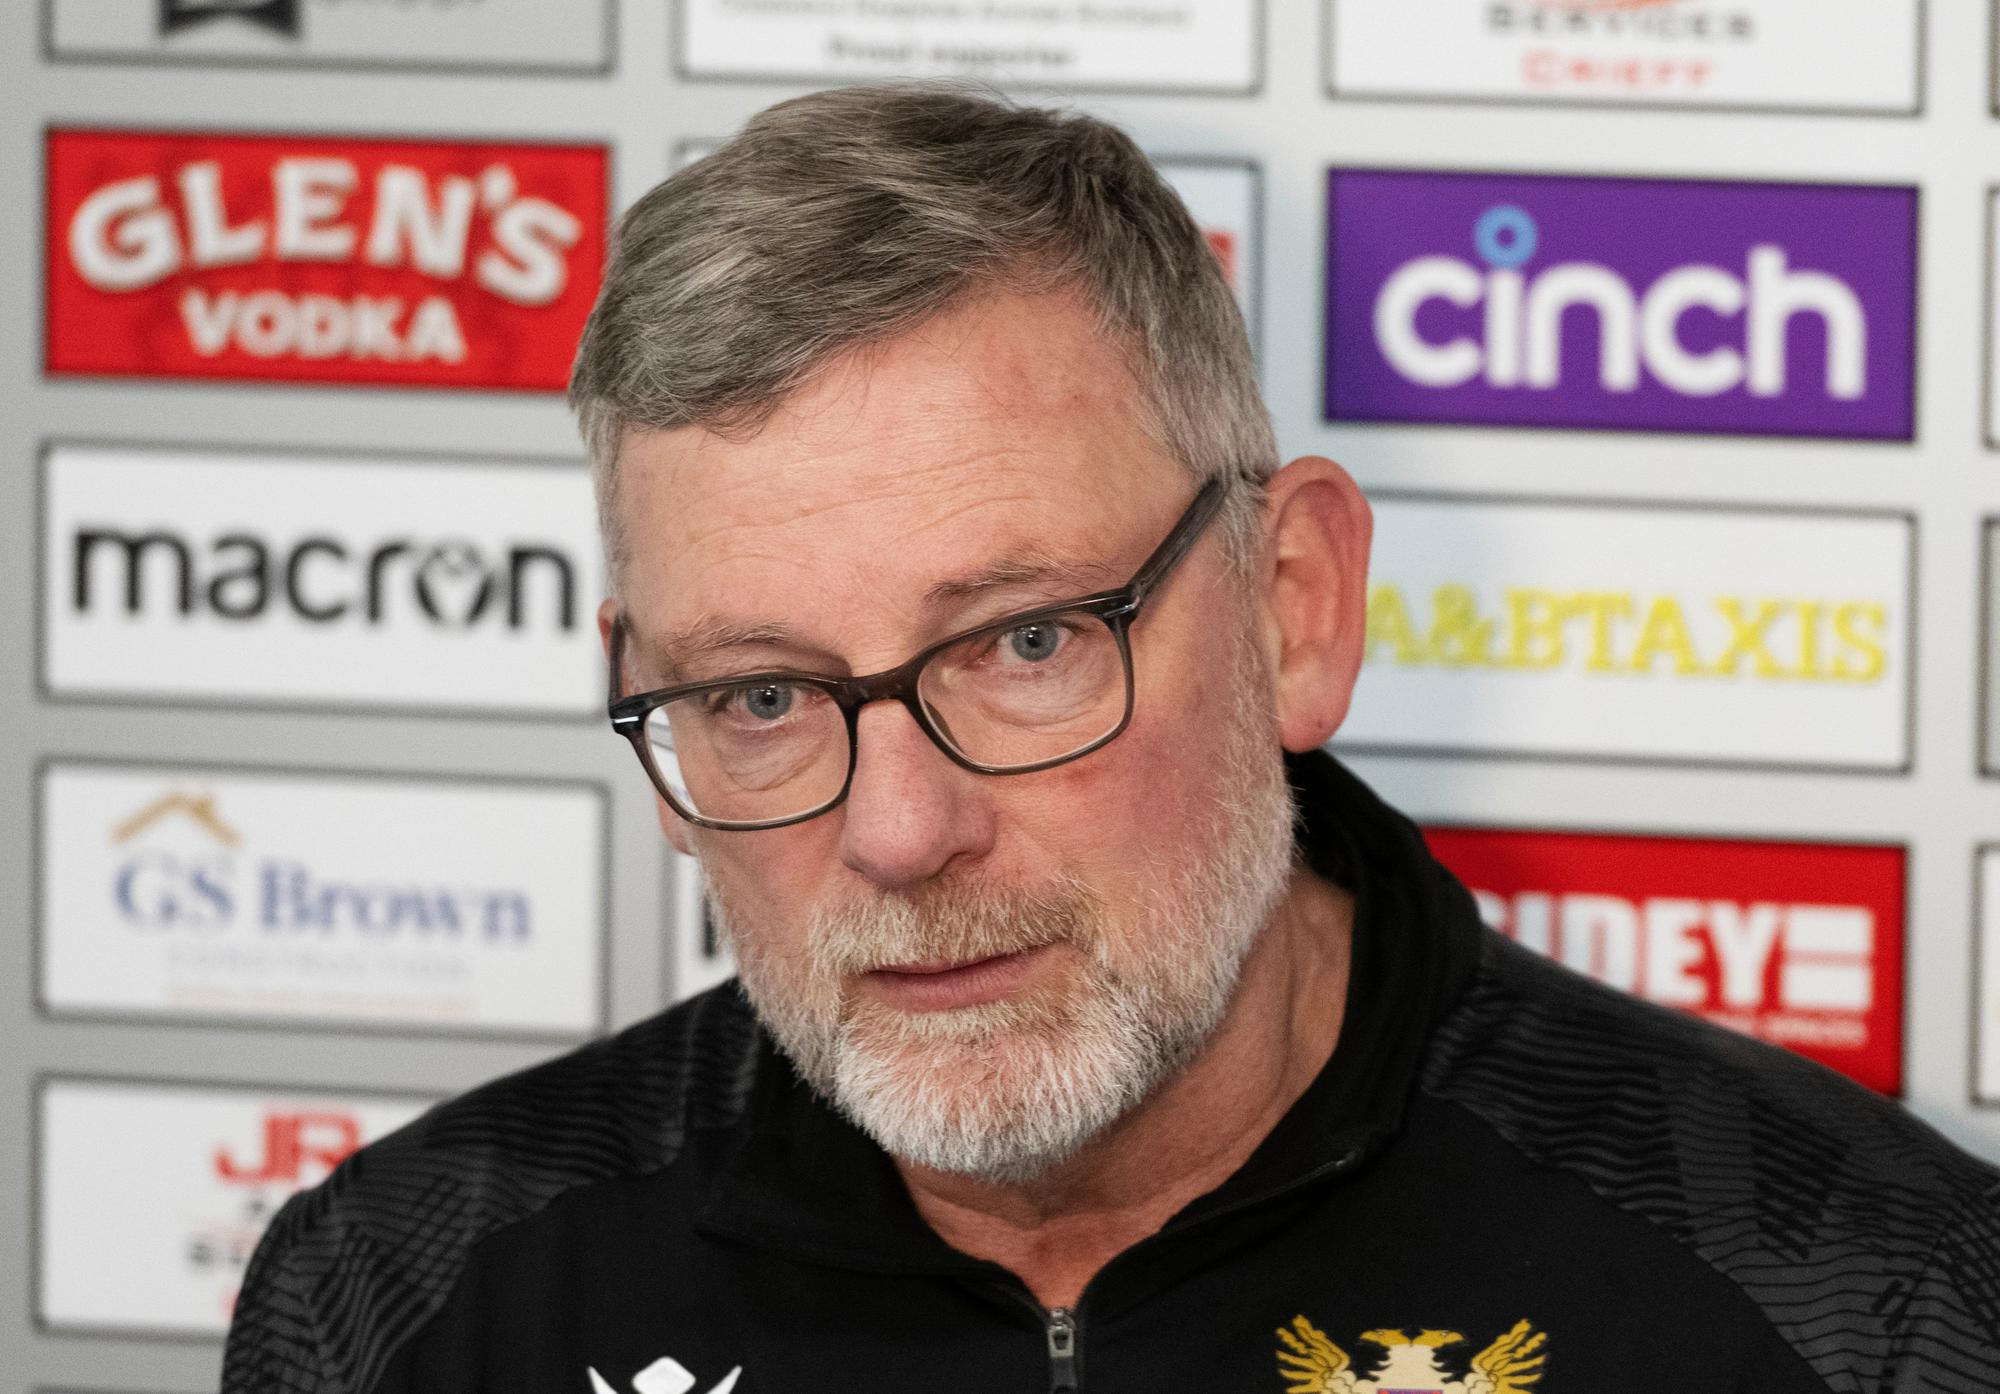 Craig Levein: Celtic and Rangers should move to England and pay back £50m per season to Scottish football